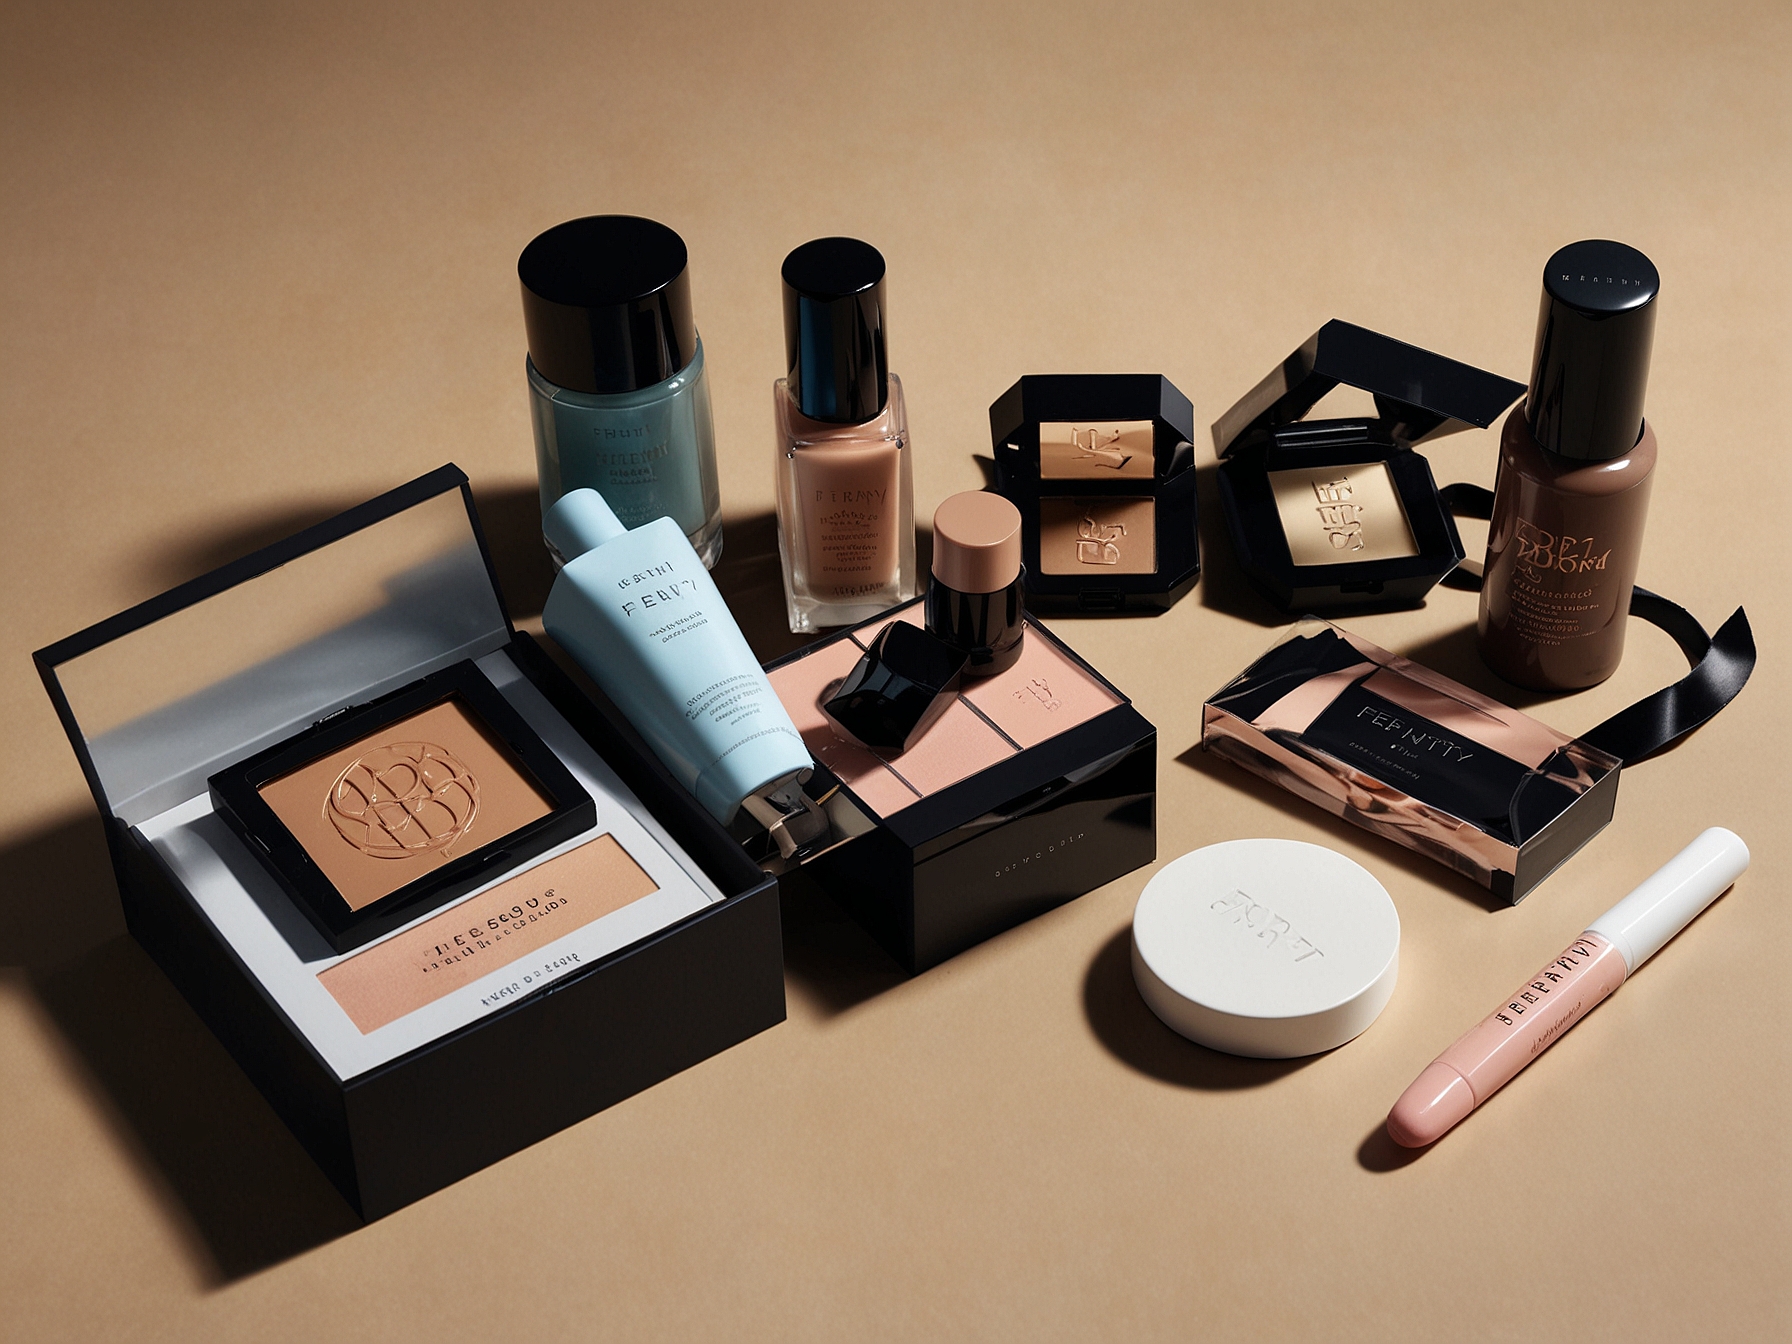 A beautifully arranged flat lay of the Boots beauty box contents, showcasing products from Fenty, r.e.m, and Bobbi Brown, along with additional skincare treasures. Perfect for beauty enthusiasts.